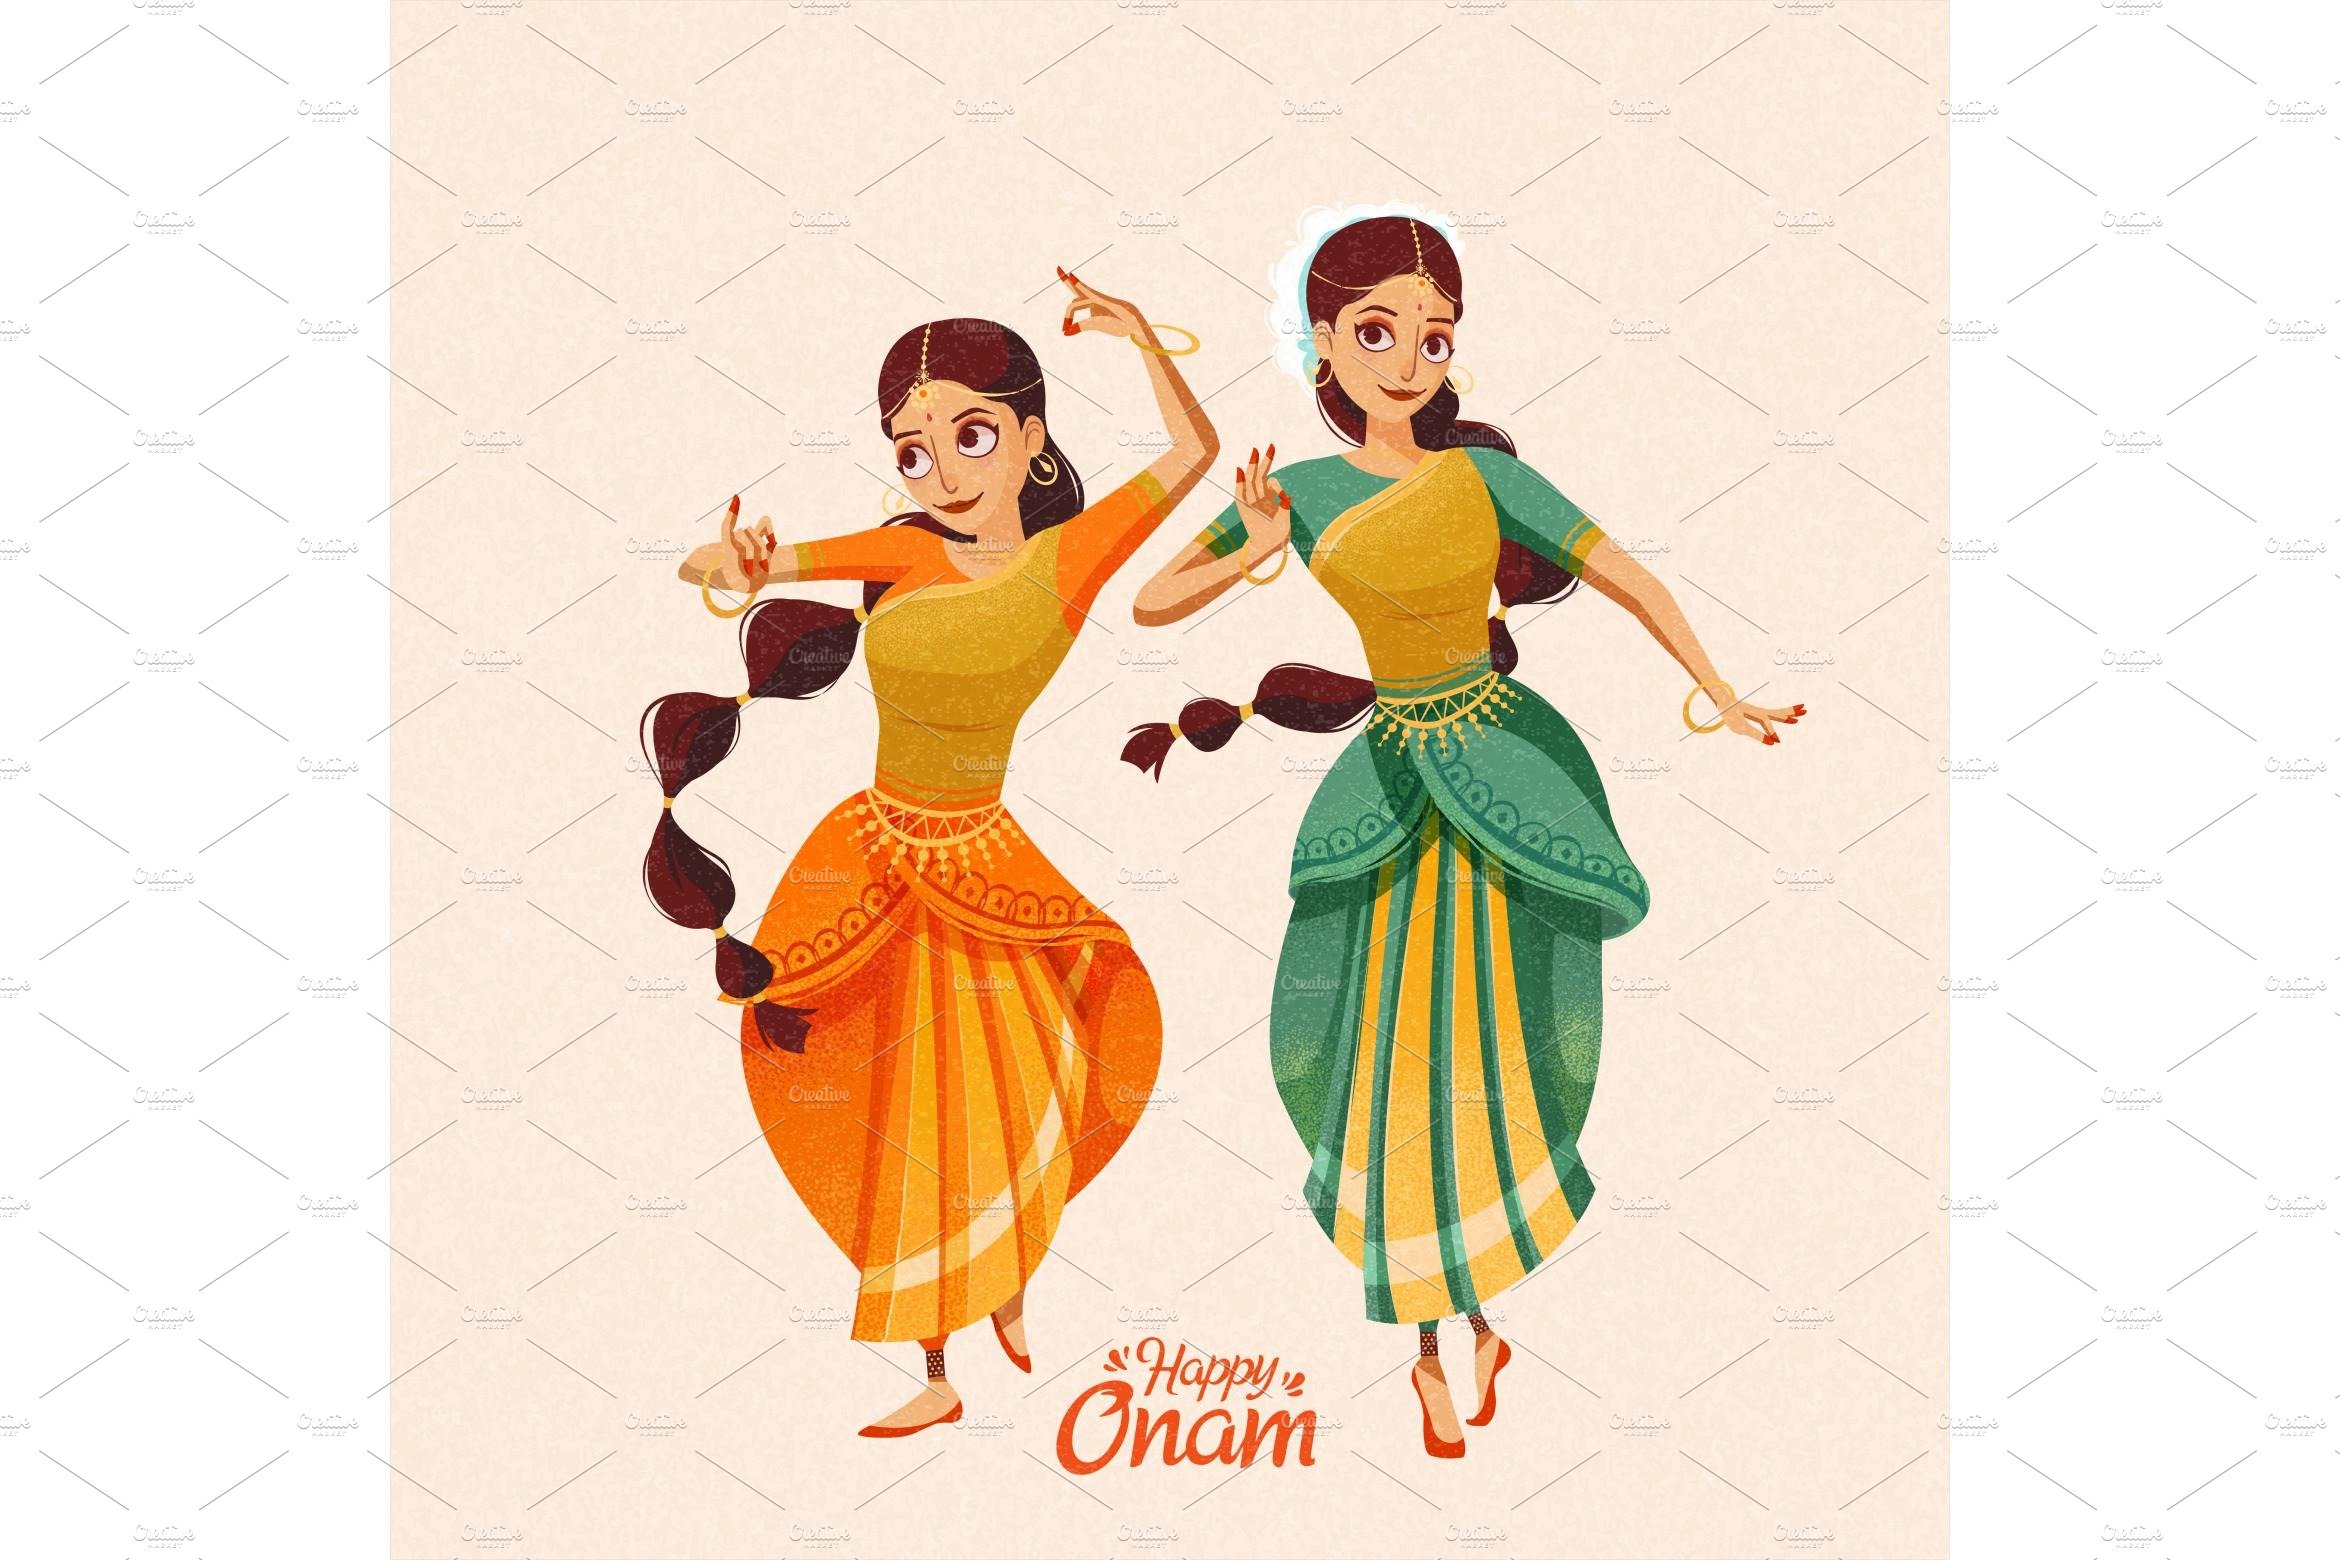 Happy Onam two beautiful dancers cover image.